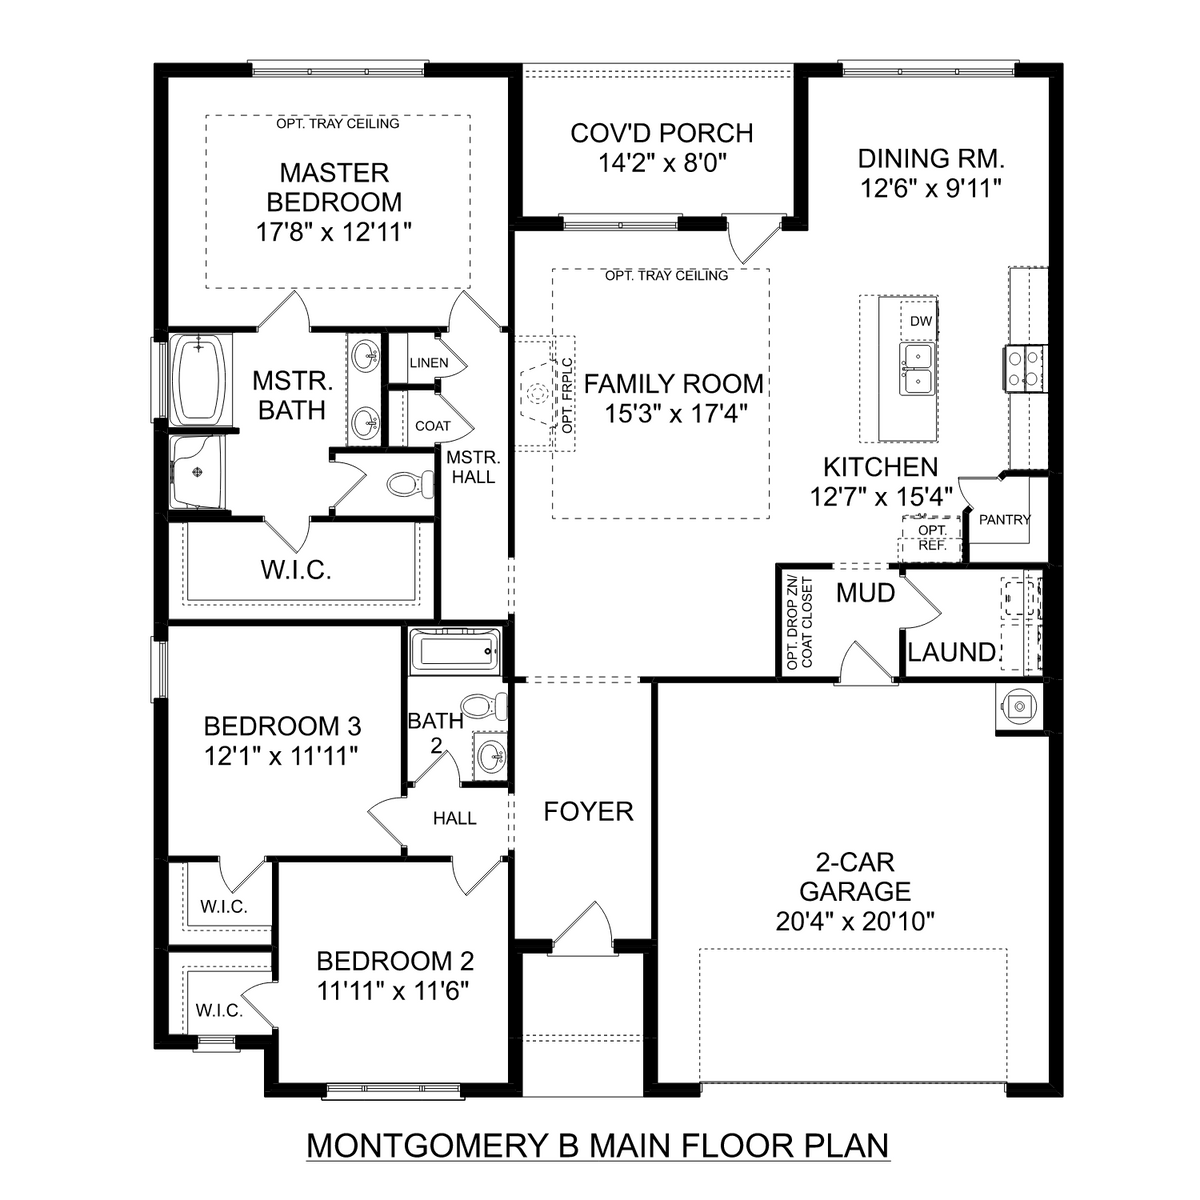 1 - The Montgomery B floor plan layout for 1908 Dawn Court in Davidson Homes' Cain Park community.